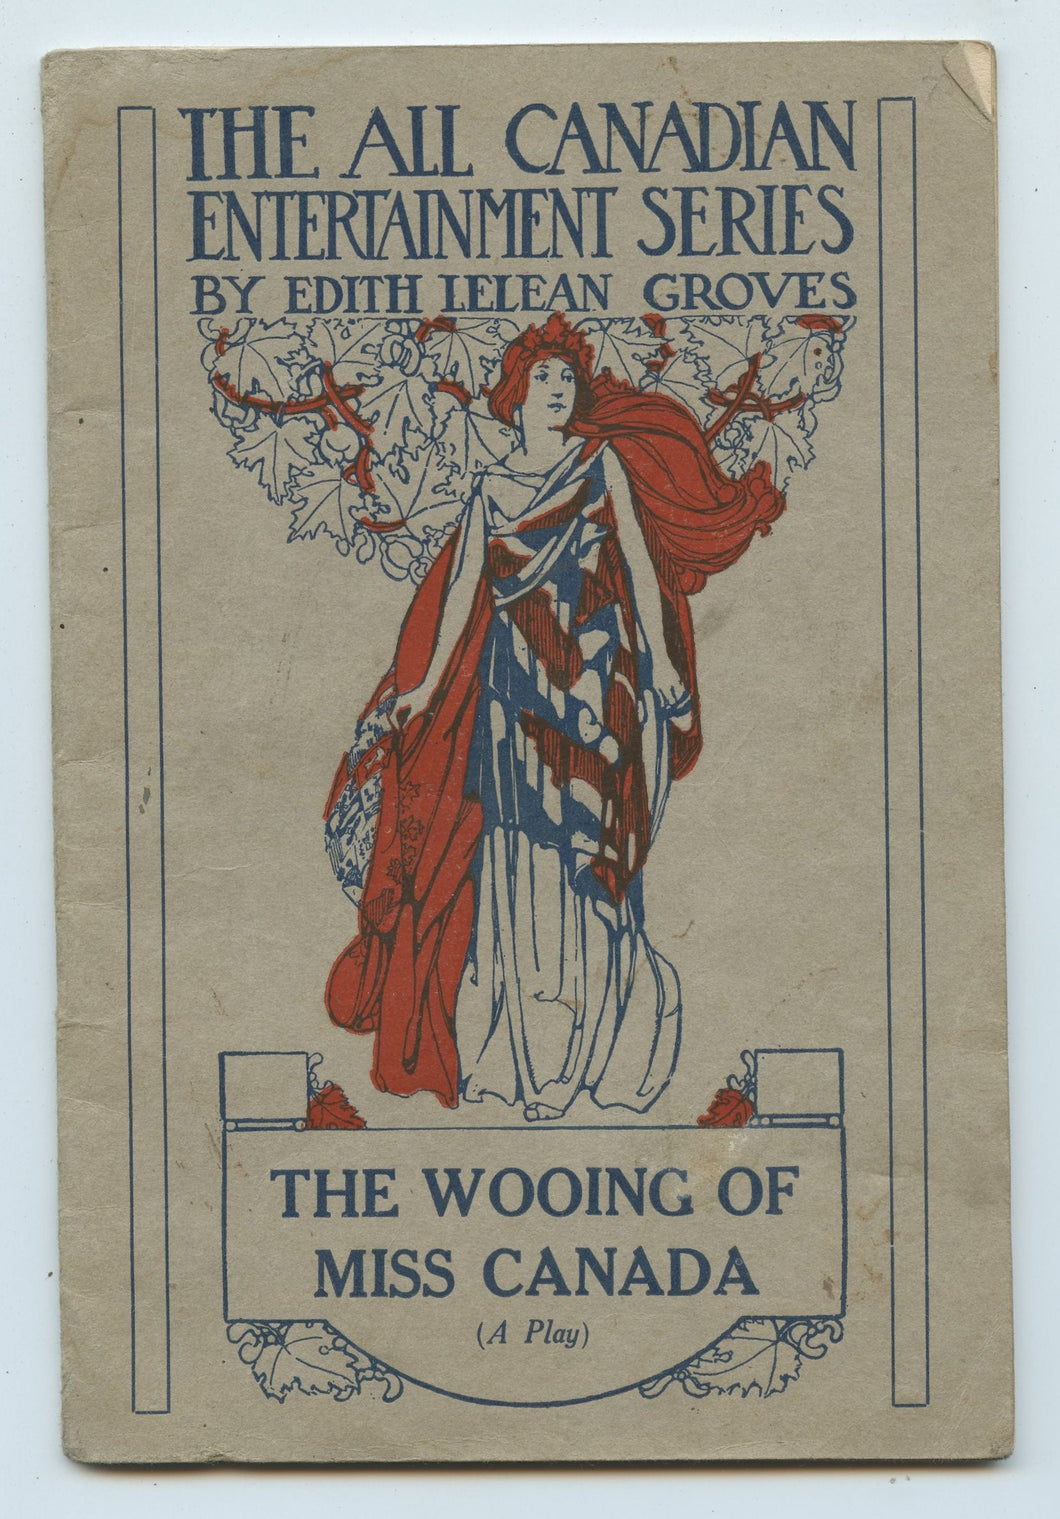 The Wooing of Miss Canada (A Play)